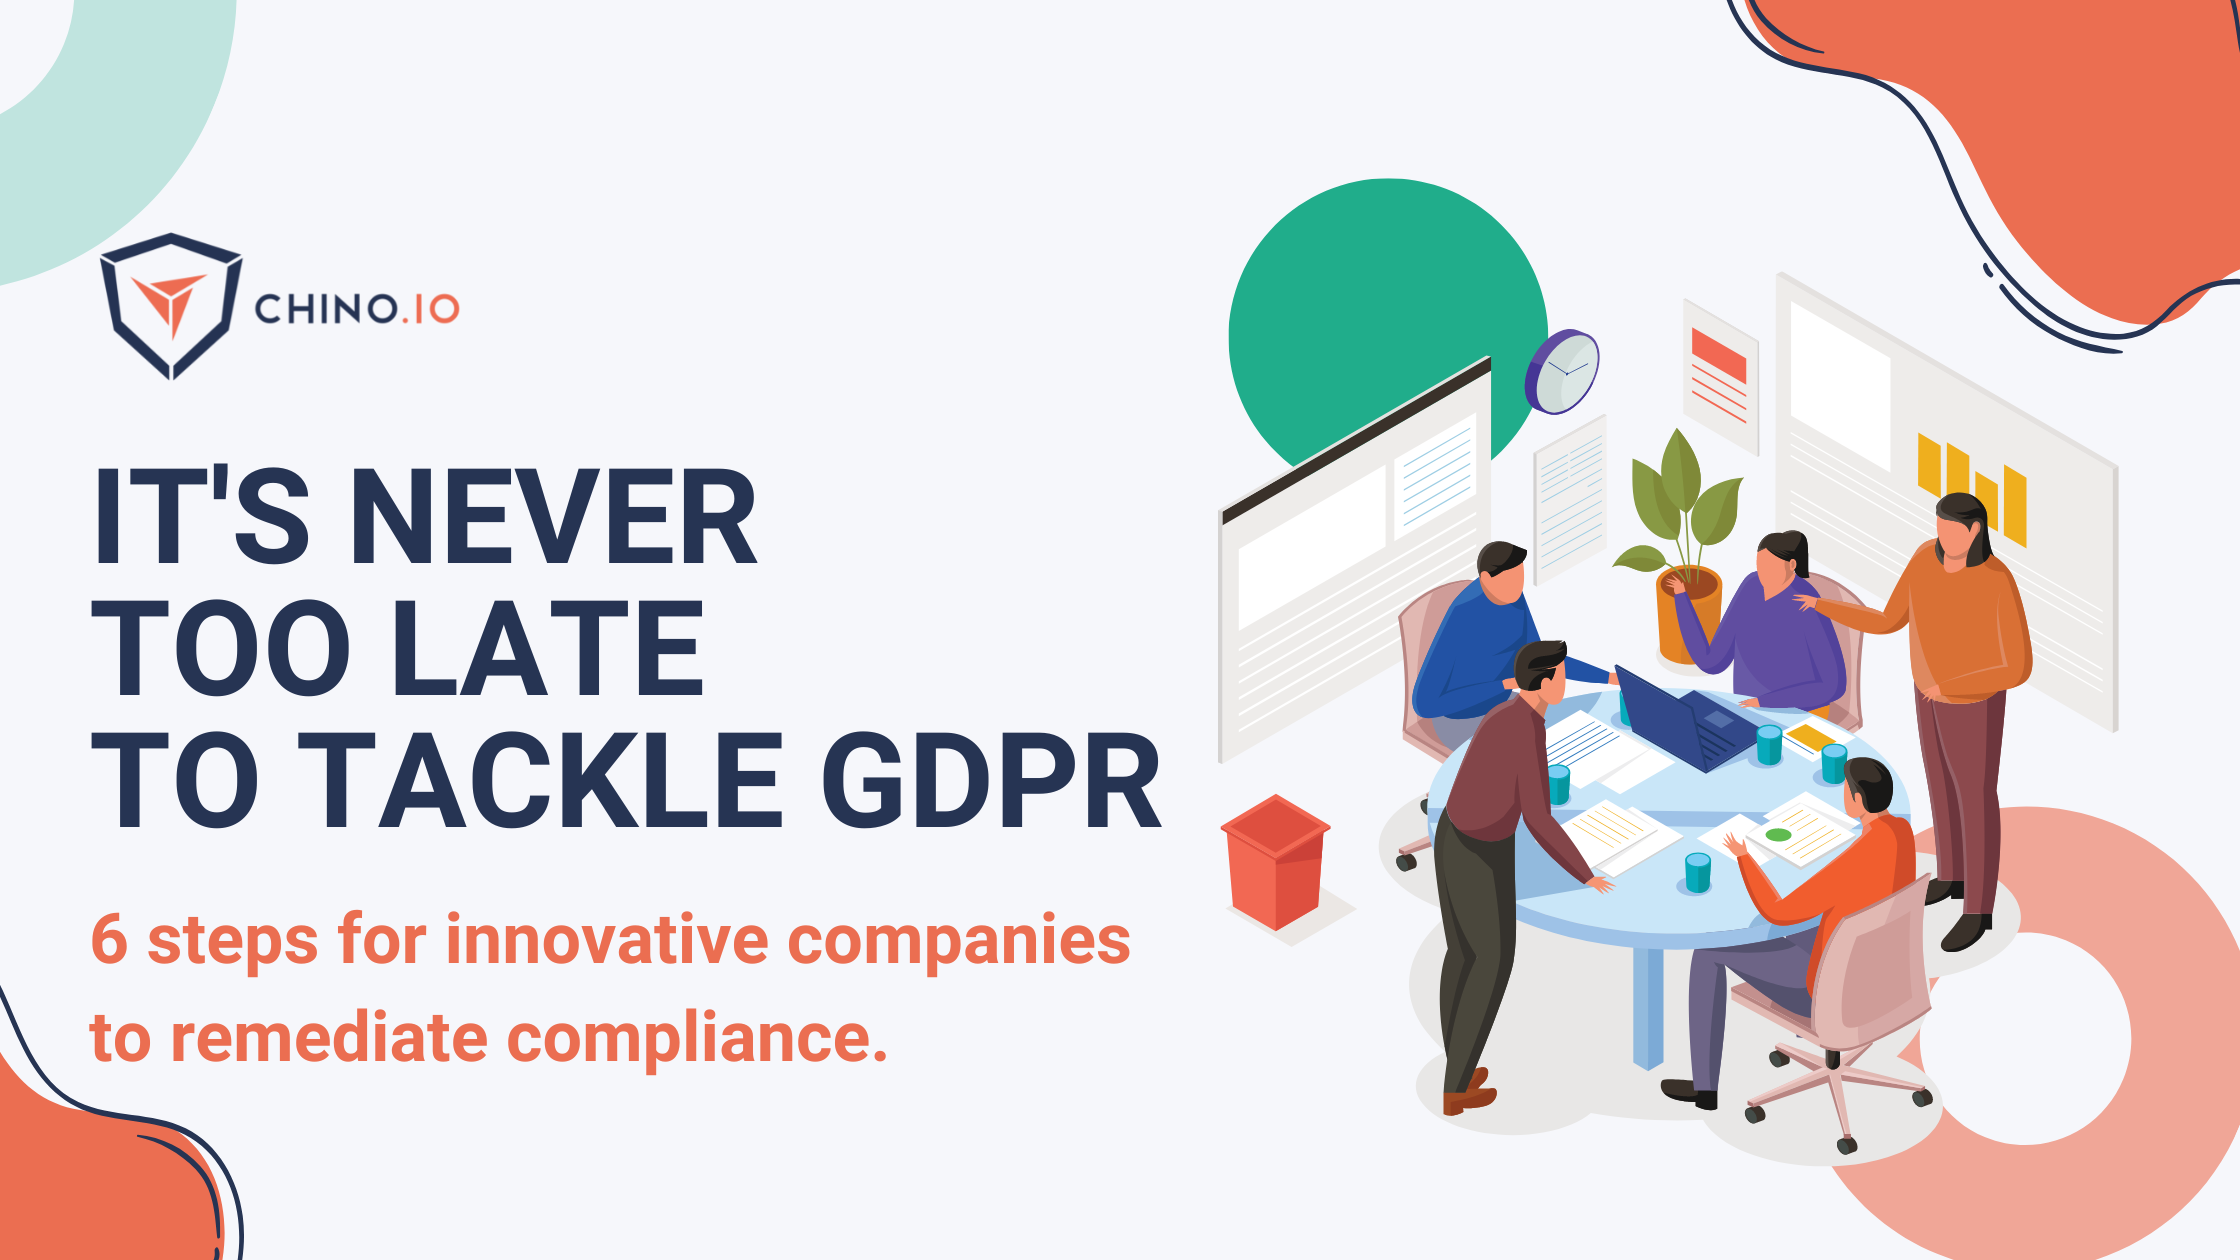 It’s never too late to tackle GDPR. 
6 steps for innovative companies to remediate compliance.